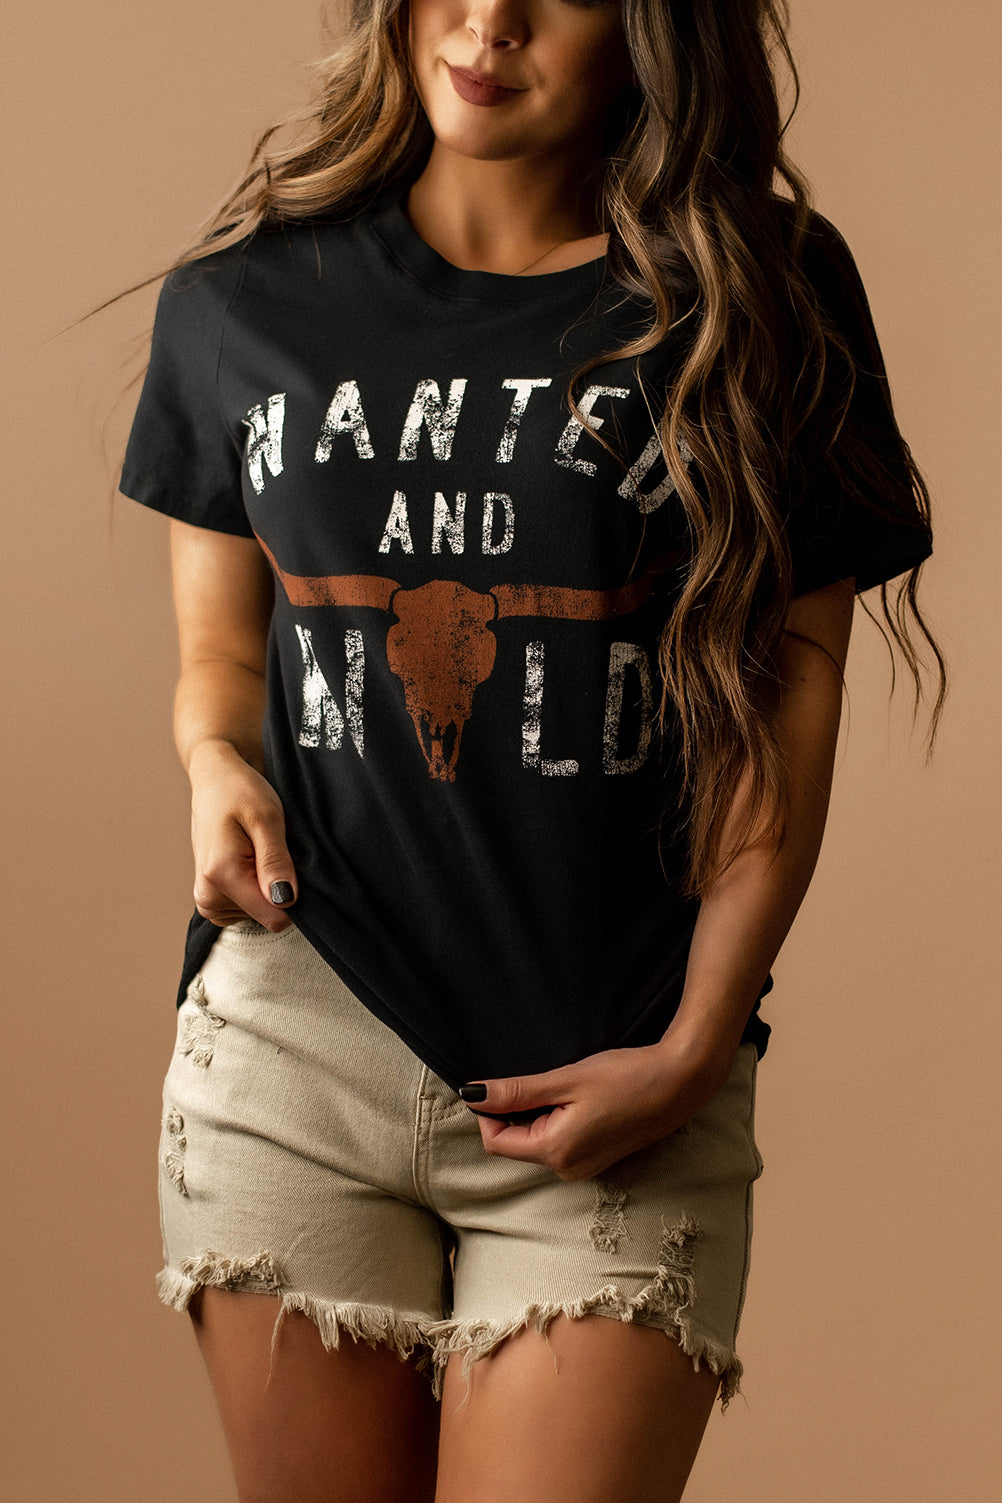 Wanted & Wild Graphic Tee (Black)